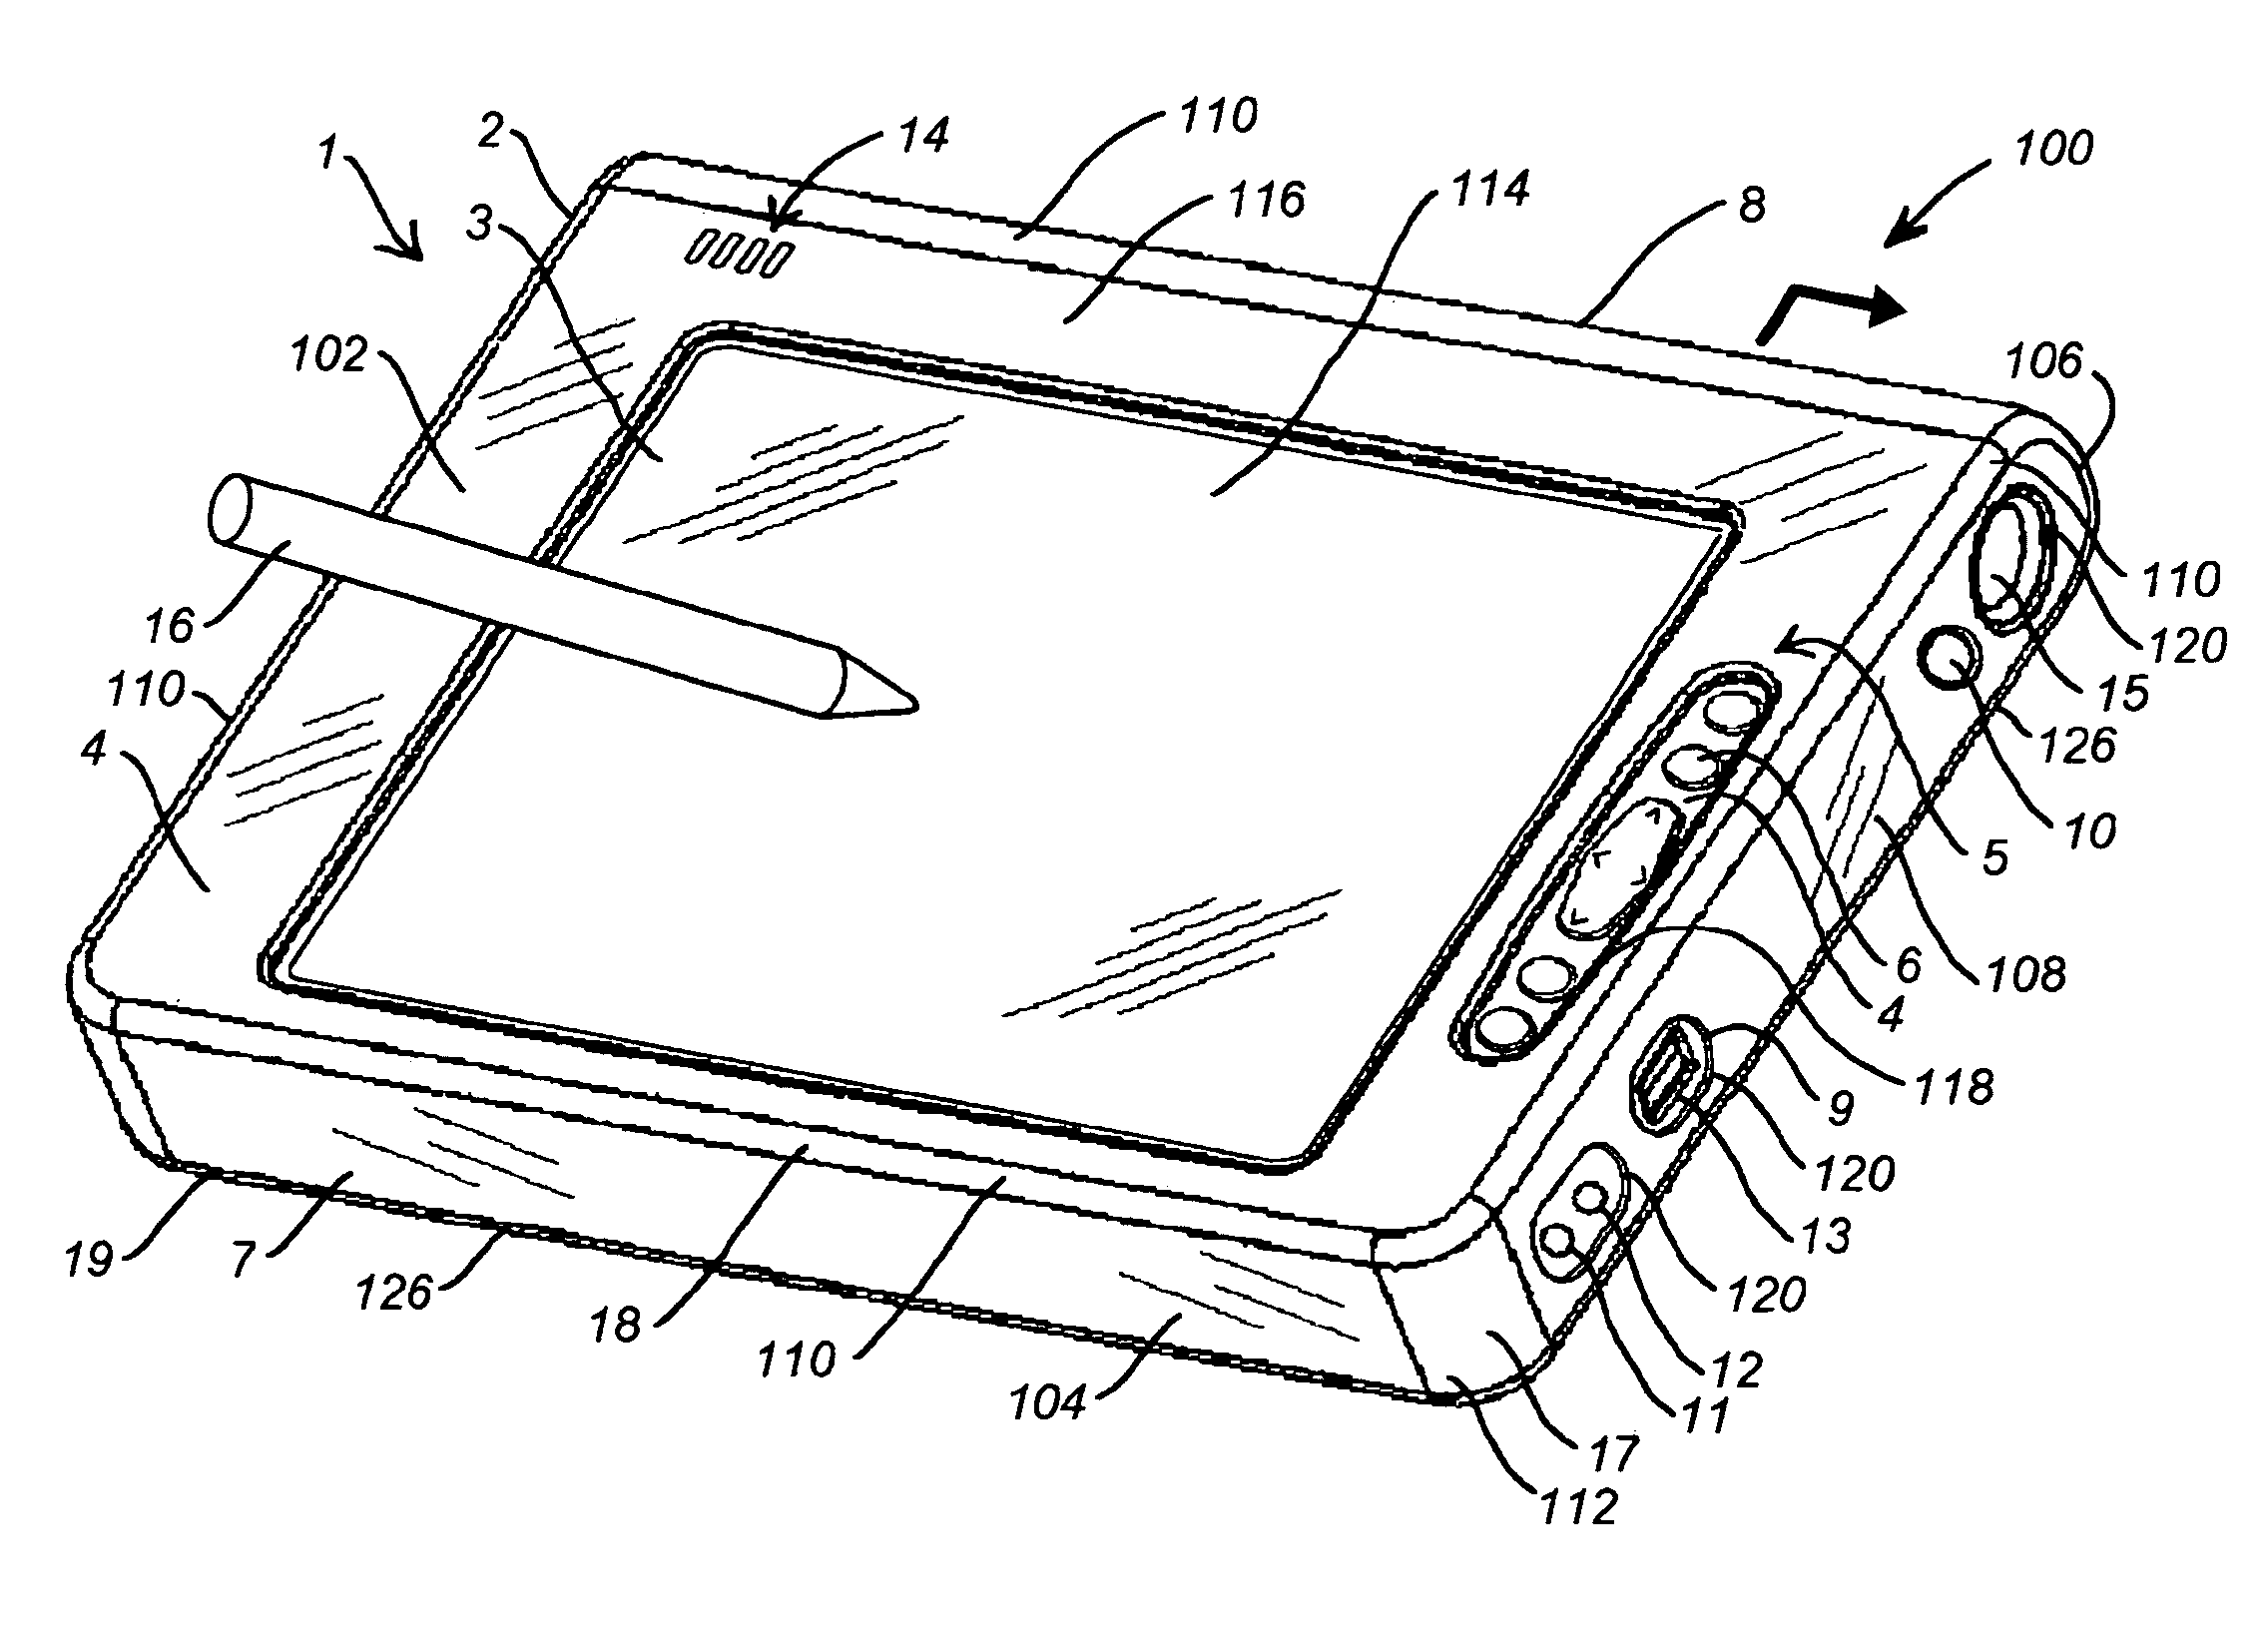 Protective cover for device having touch screen